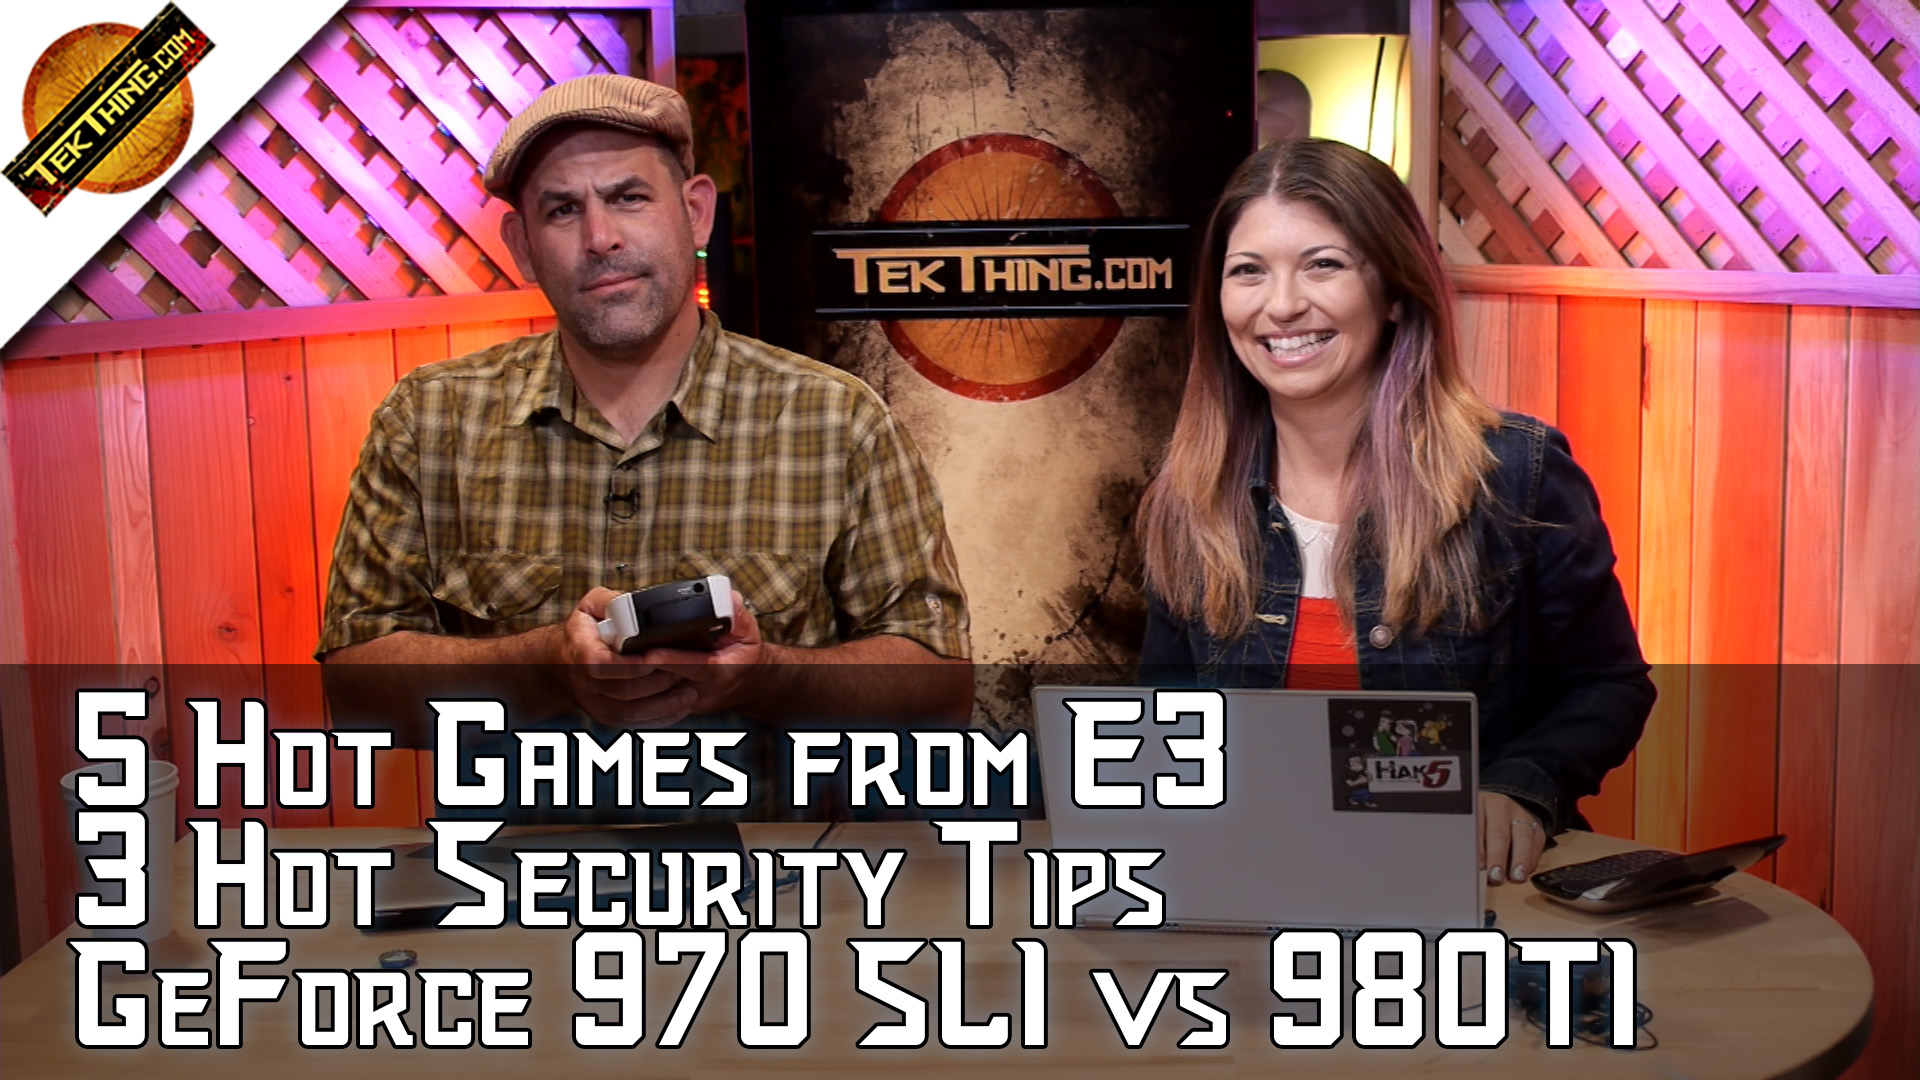 5 Hot Games from E3, 970 SLI vs. 980Ti, Get Yourself A Credit Lock! Peppermint OS, LastPass Hacked